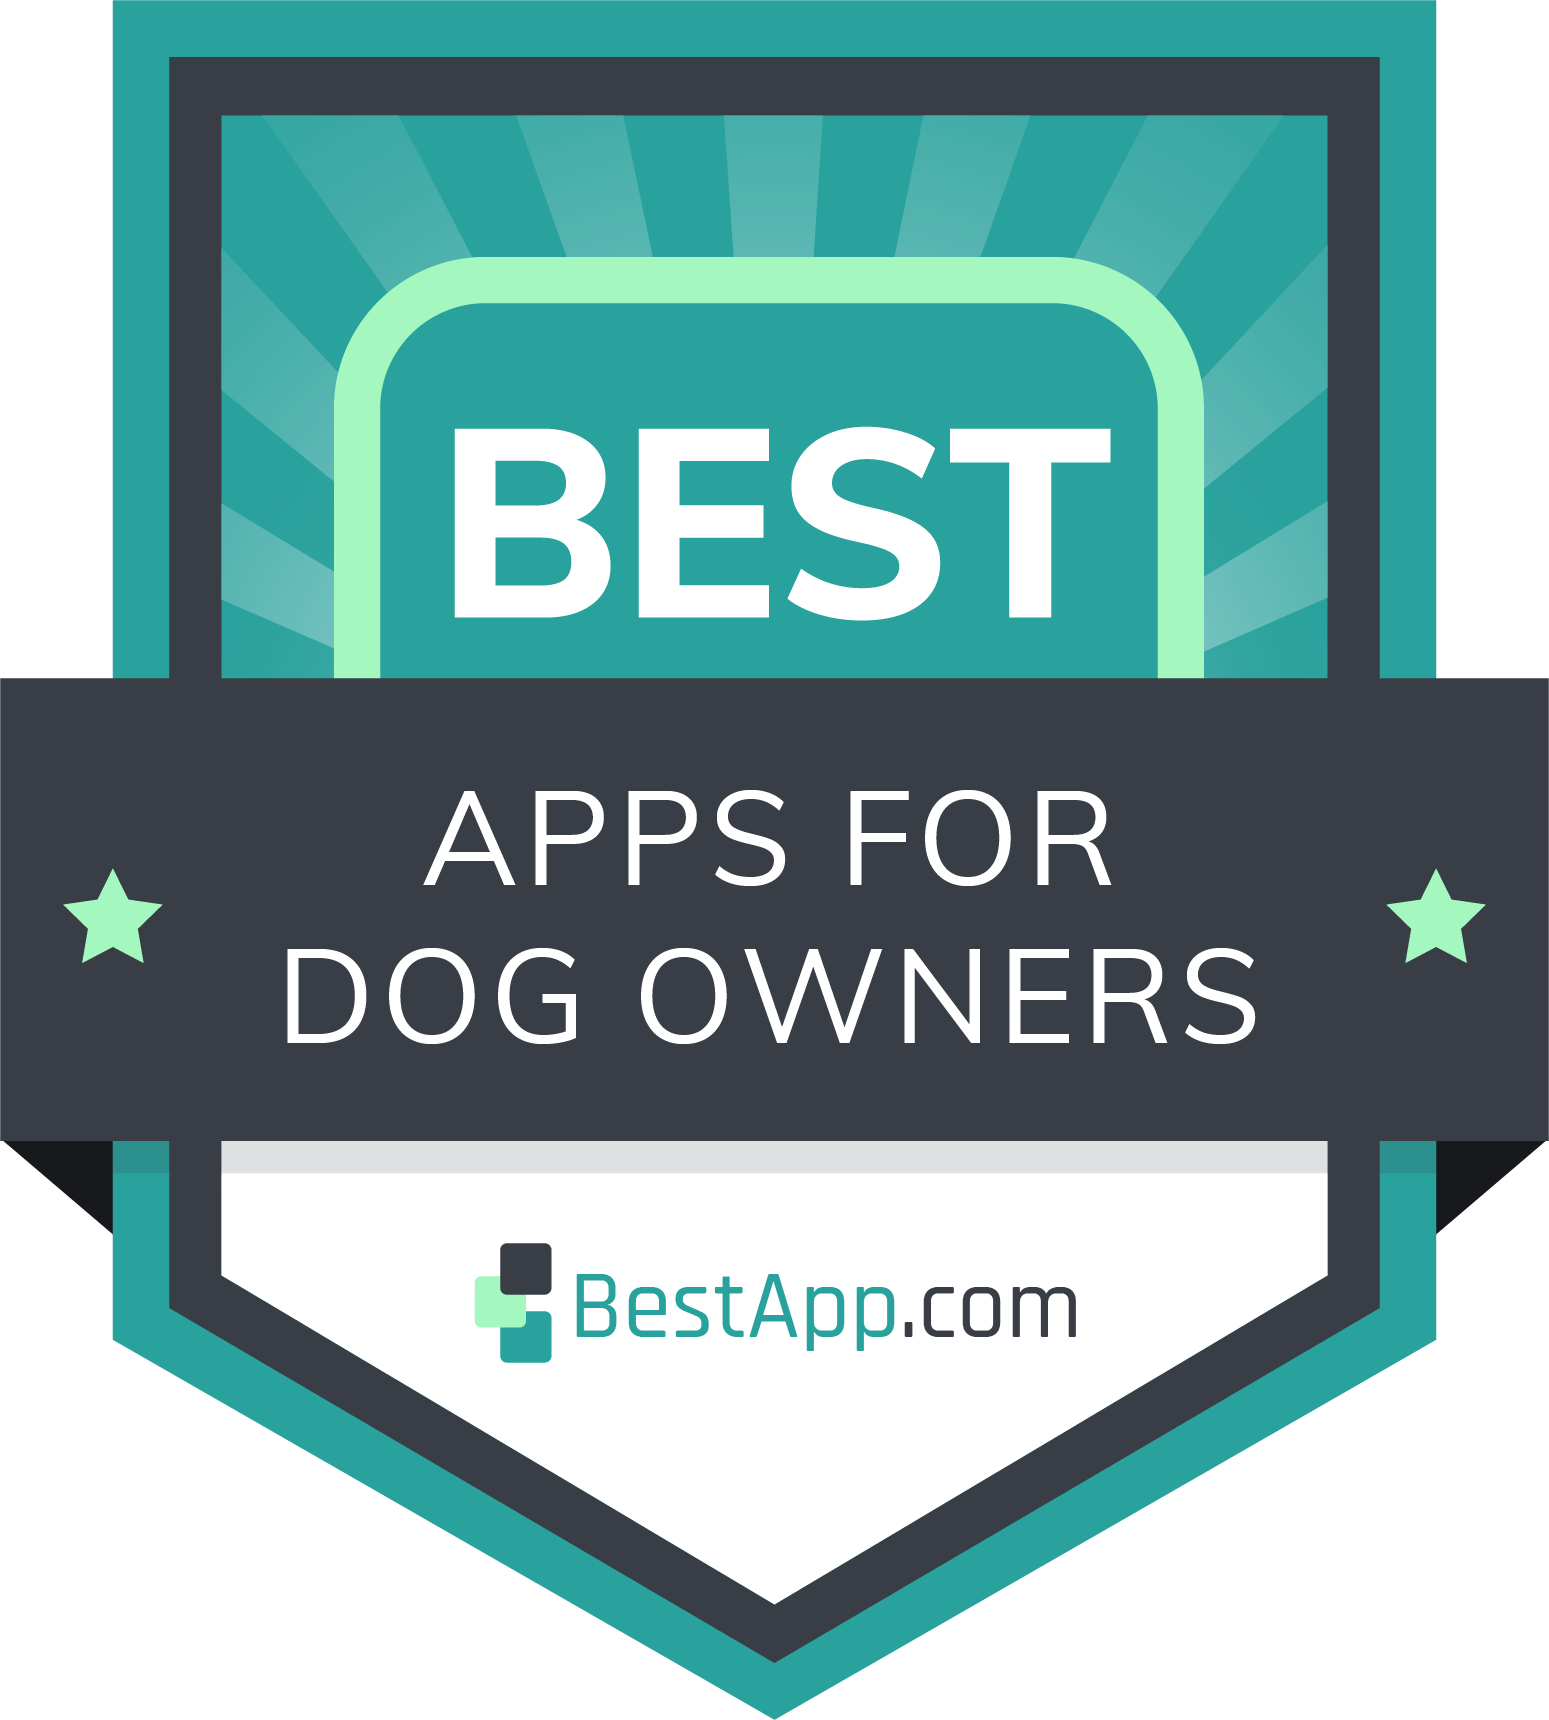 Best Apps for Dog Owners Badge